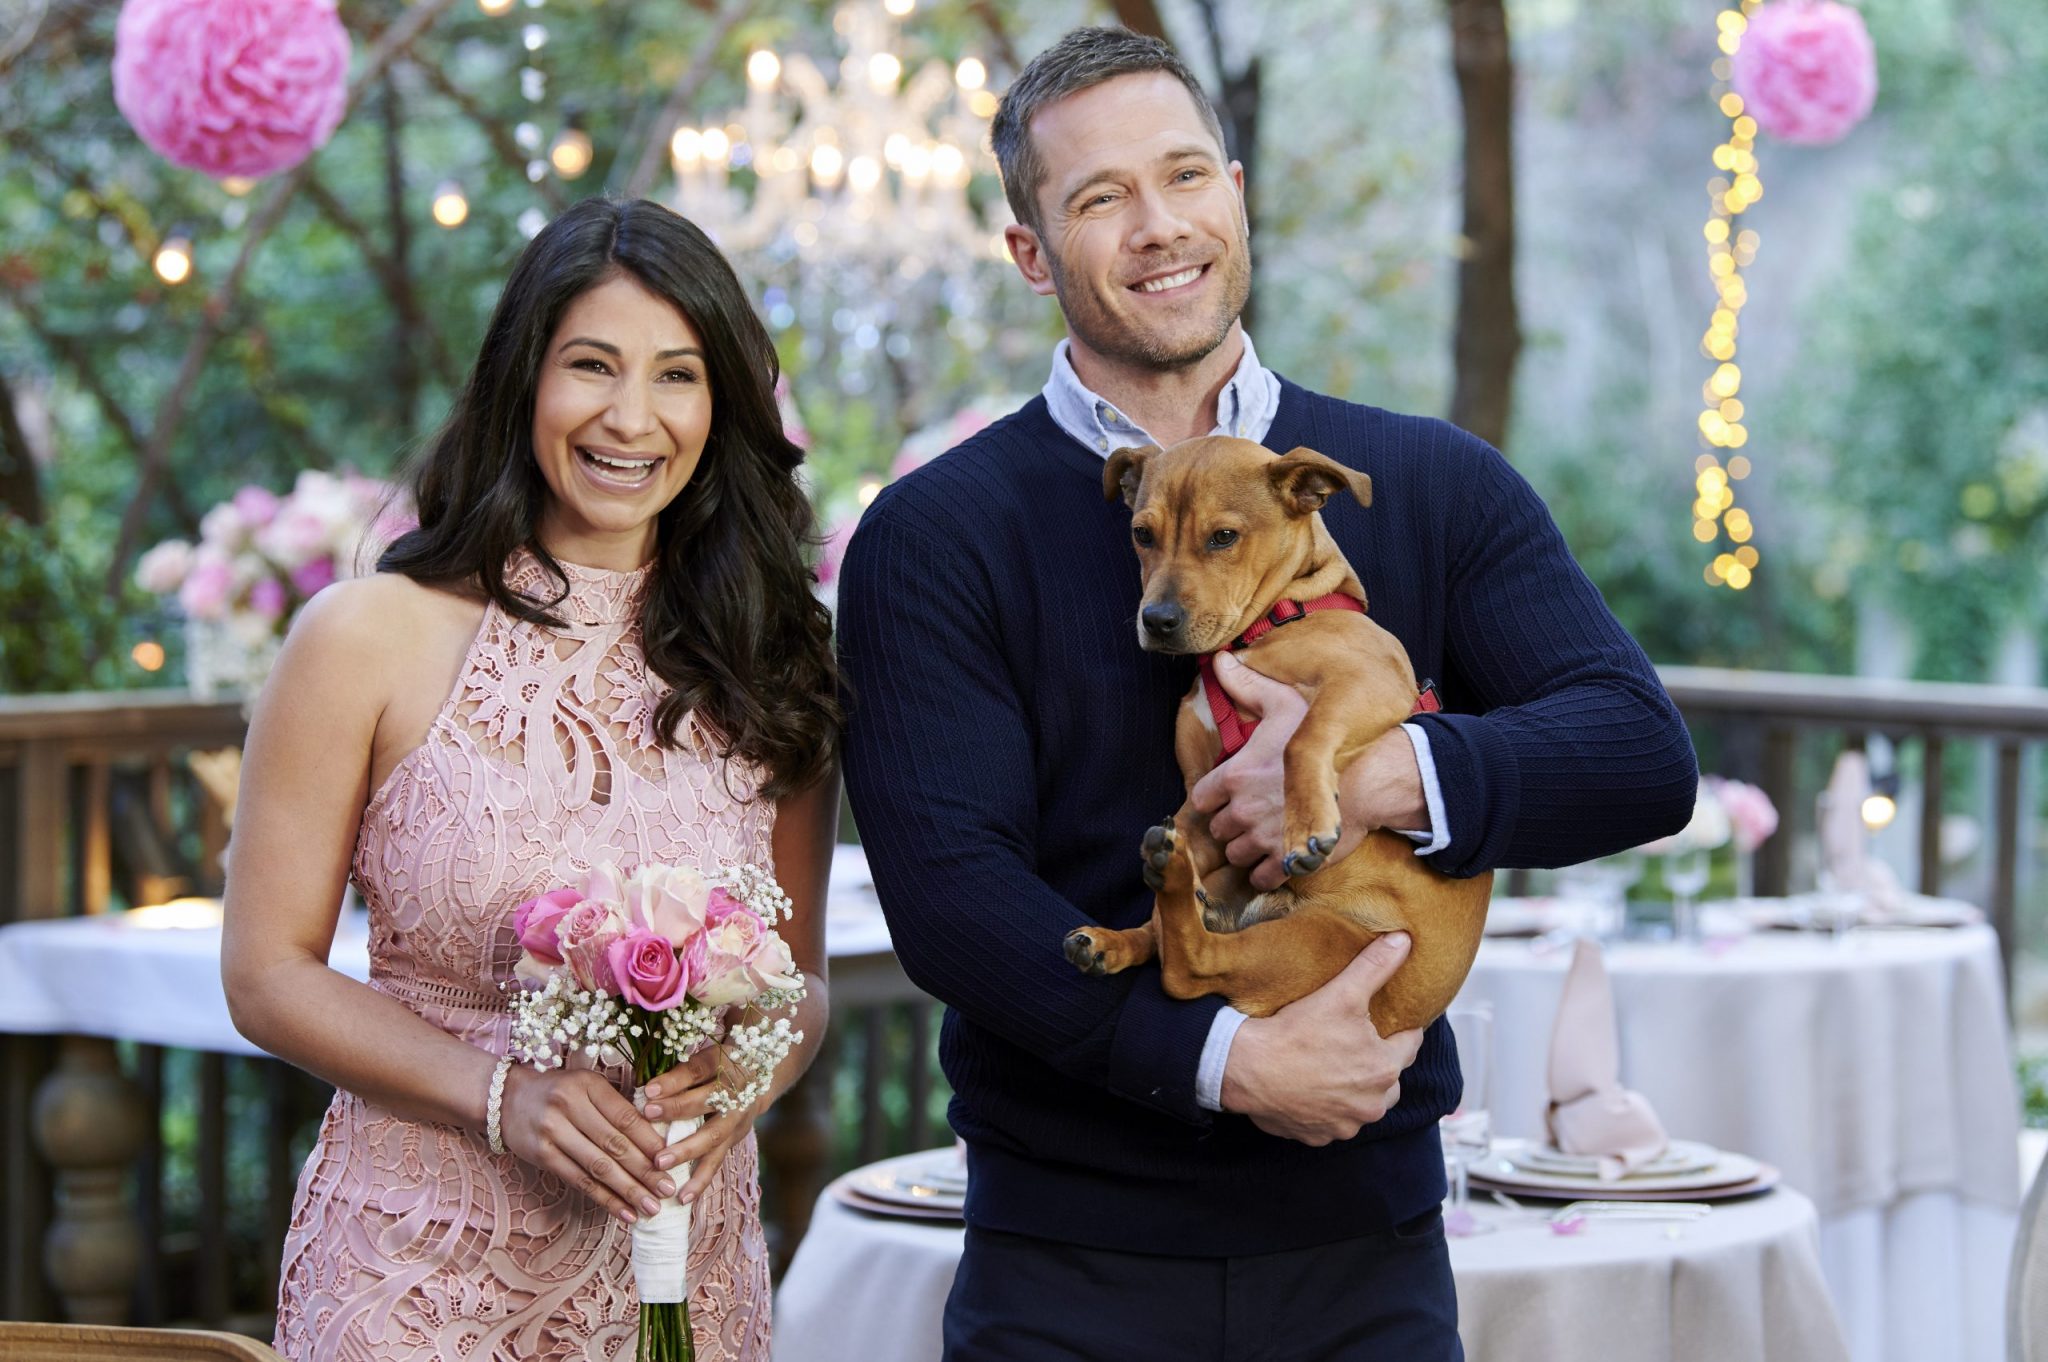 A sneak peek at our Love Ever After original movies plus Hallmark Channel's upcoming Cat Bowl II, Kitten Bowl VII, and the 2020 American Rescue Dog Show. Photo: Larissa Wohl, Luke Macfarlane Credit: ©2020 Crown Media United States LLC/Photographer: Alexx Henry/Alexx Henry Studios, LLC